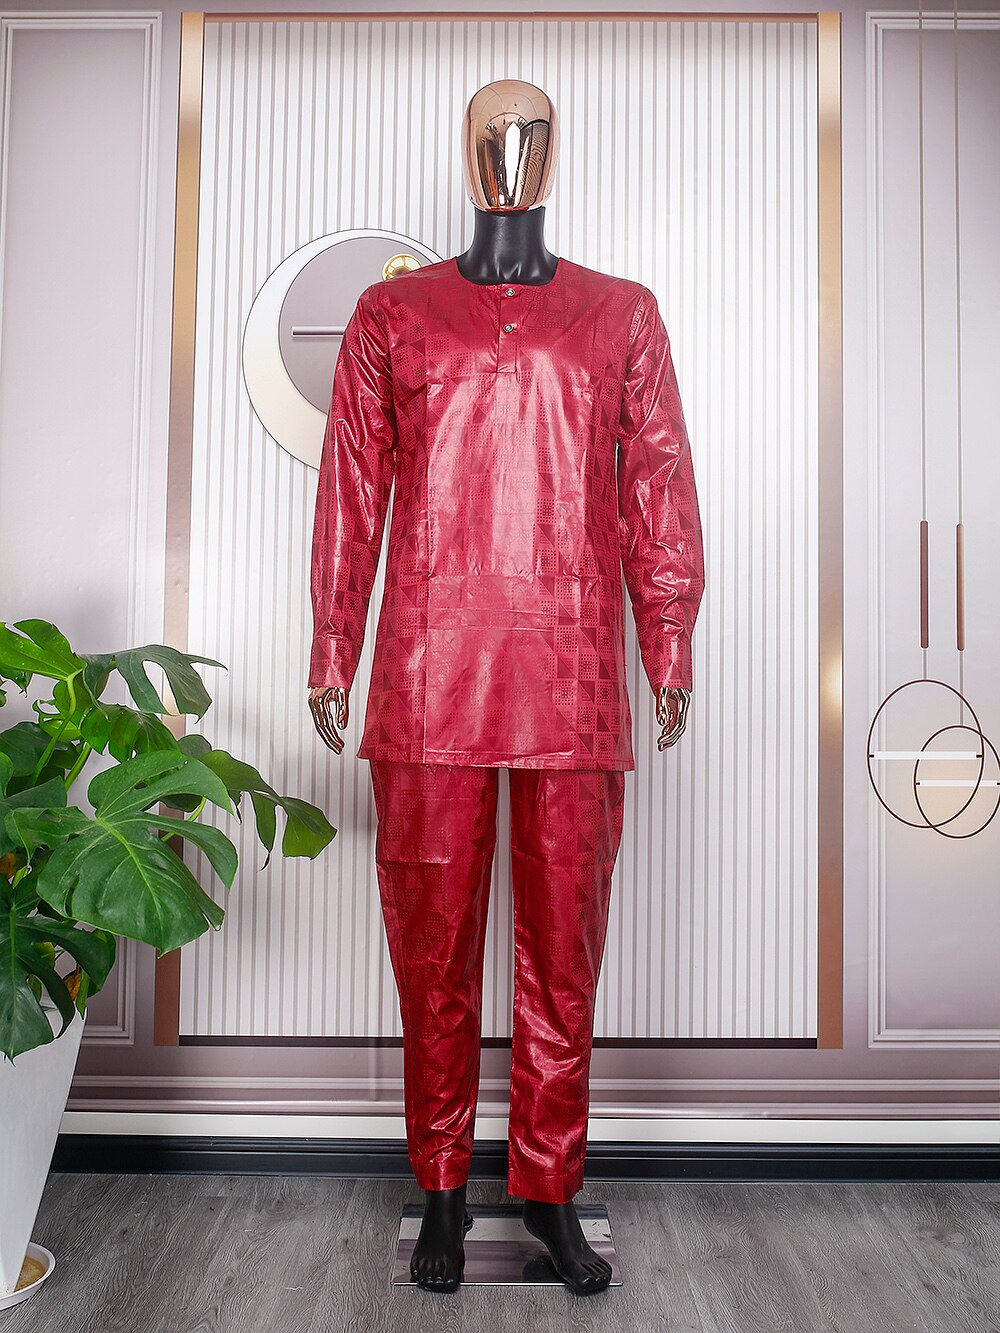 3PC Tradition Embroidery Set Clothing - African Clothes for Men - Bazin Red Shirt, Pants, Coat and Robe - Flexi Africa - Flexi Africa offers Free Delivery Worldwide - Vibrant African traditional clothing showcasing bold prints and intricate designs